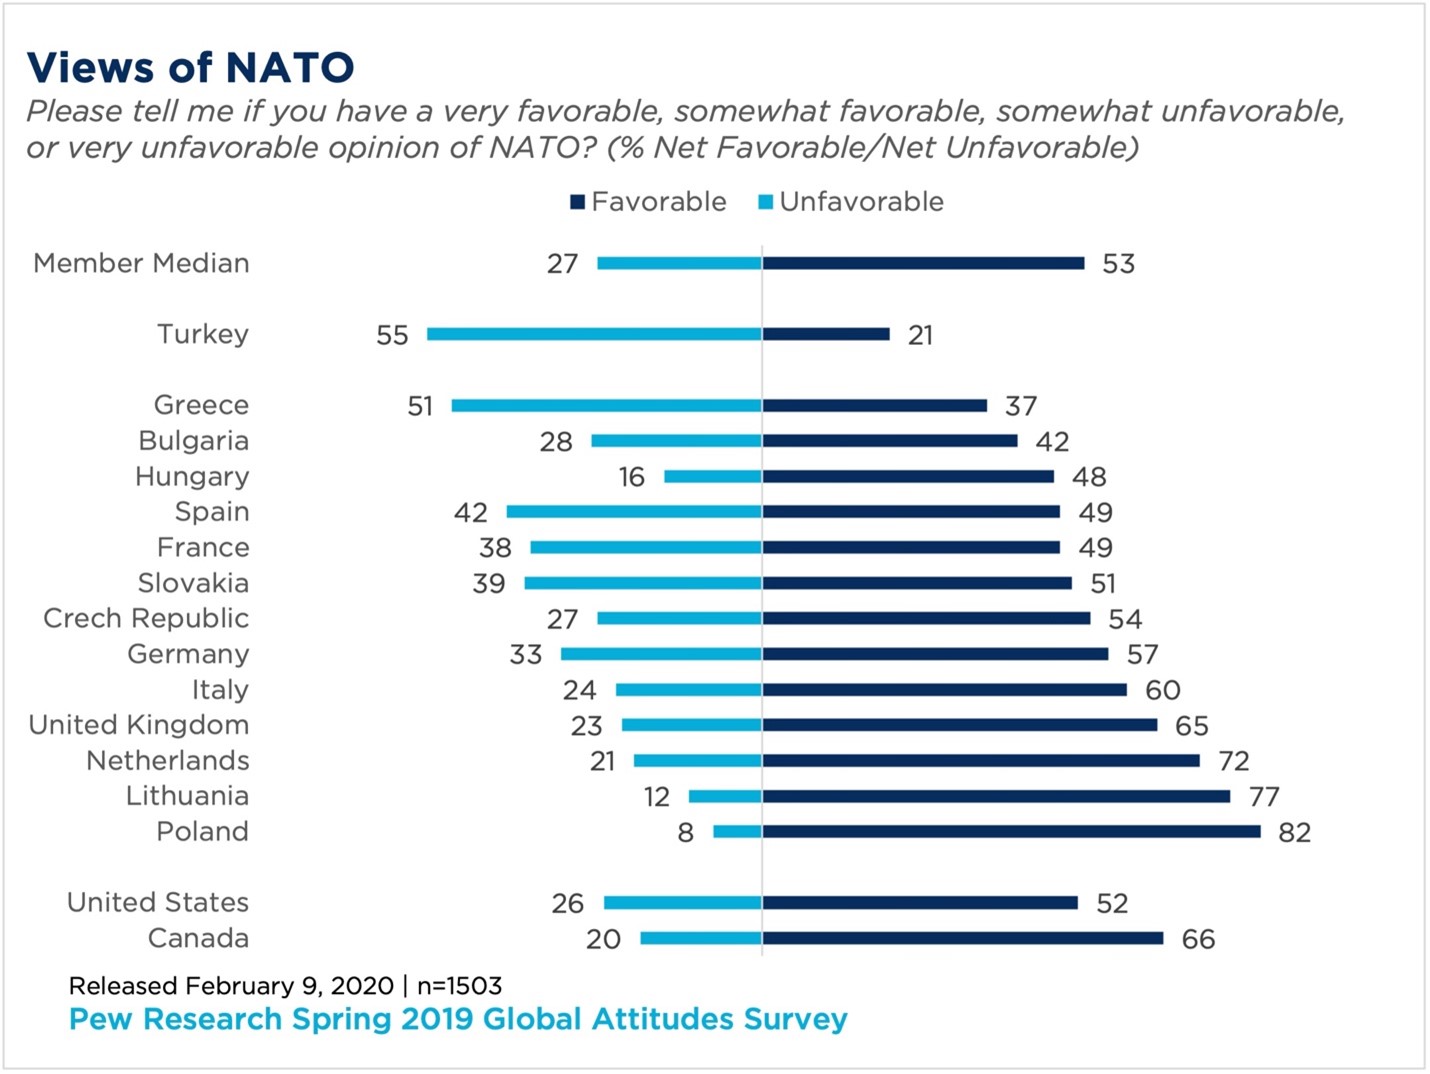 "a chart showing favorable and unfavorable views on NATO from a variety of countries"